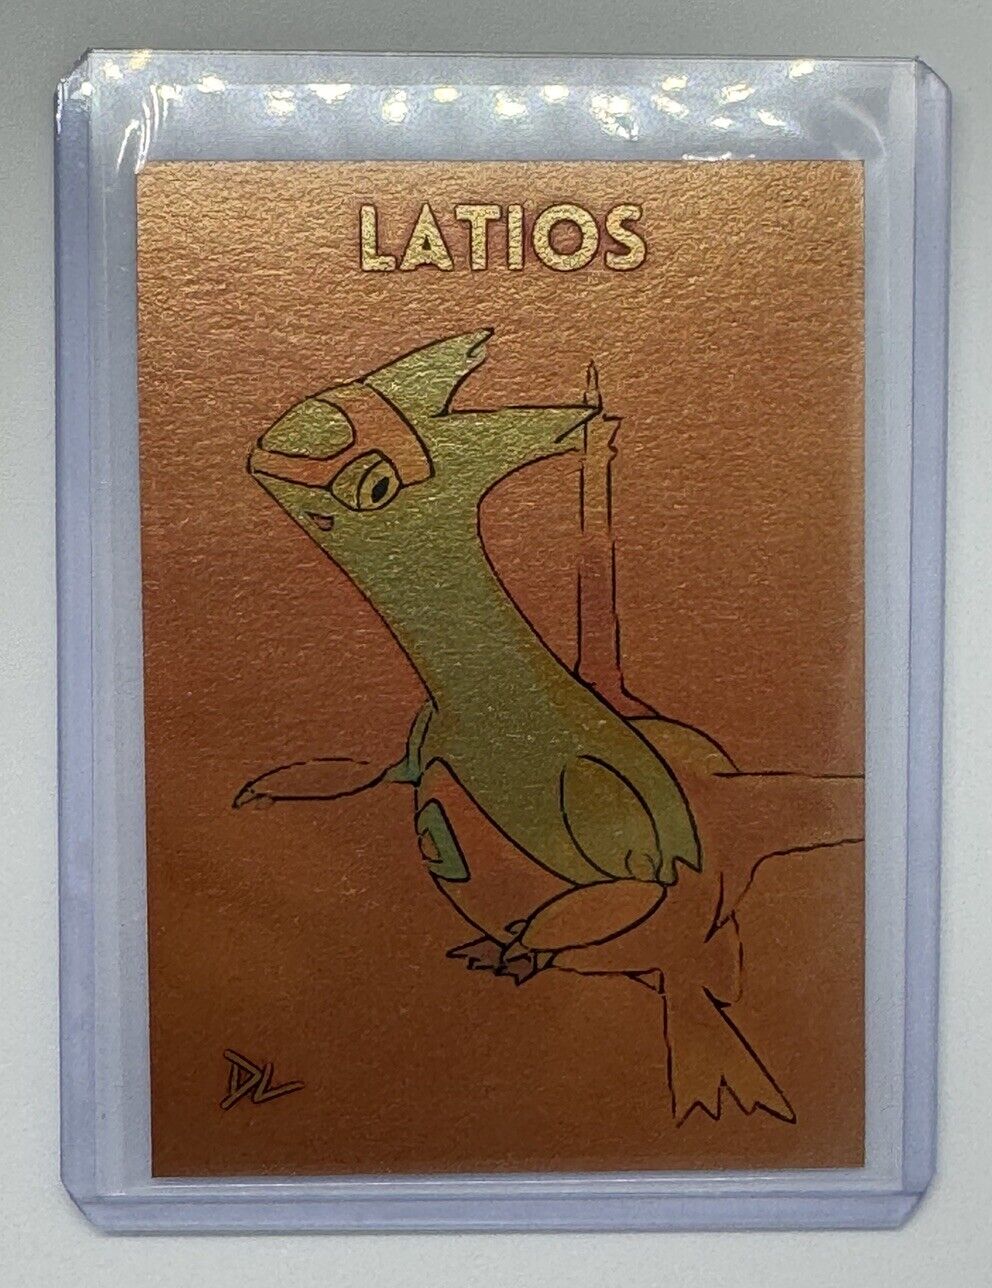 Latios Gold Plated Limited Edition Artist Signed Pokemon Trading Card 1/1